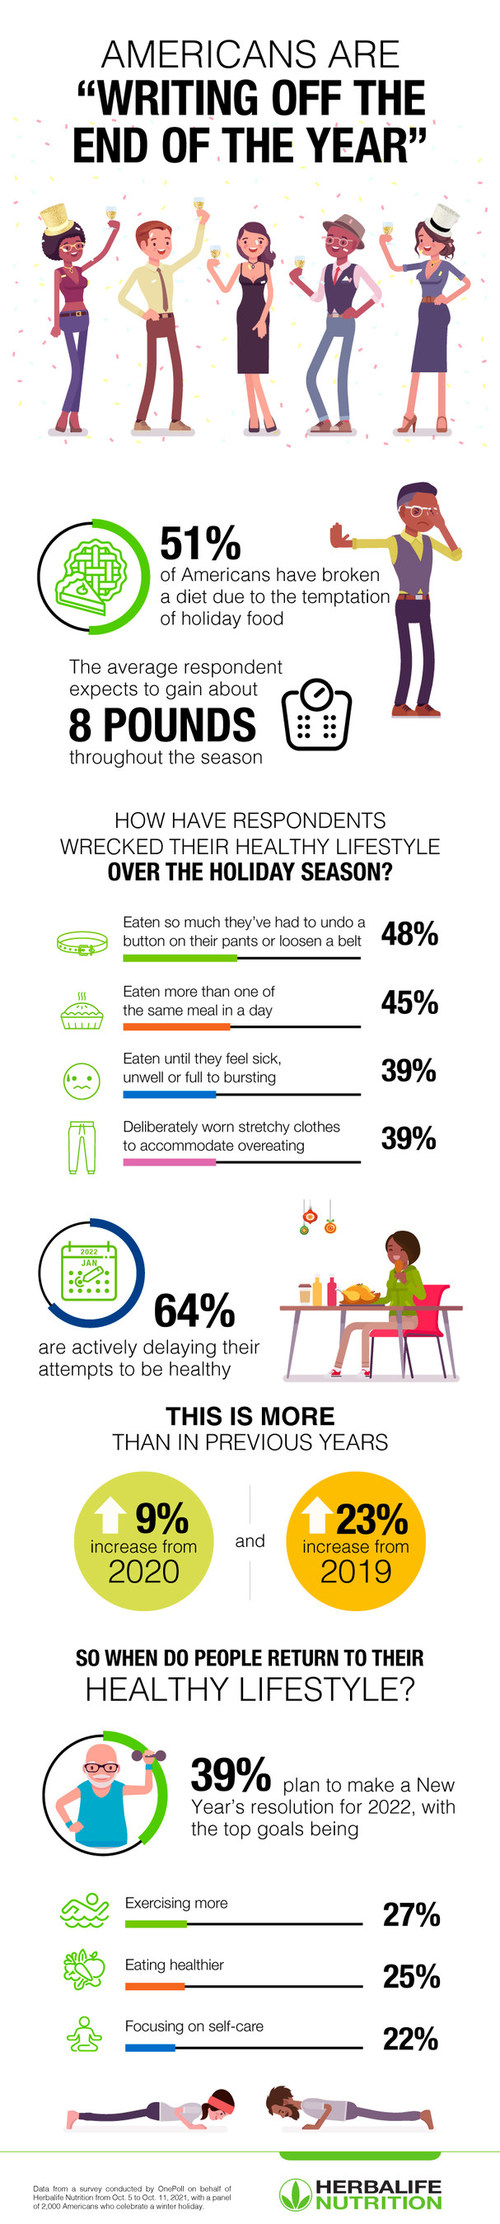 Herbalife Nutrition's "Writing Off The Holidays" survey, conducted by OnePoll interviewed 2,000 Americans who celebrate a winter holiday, examining pre, during and post-holiday eating habits and attitudes.